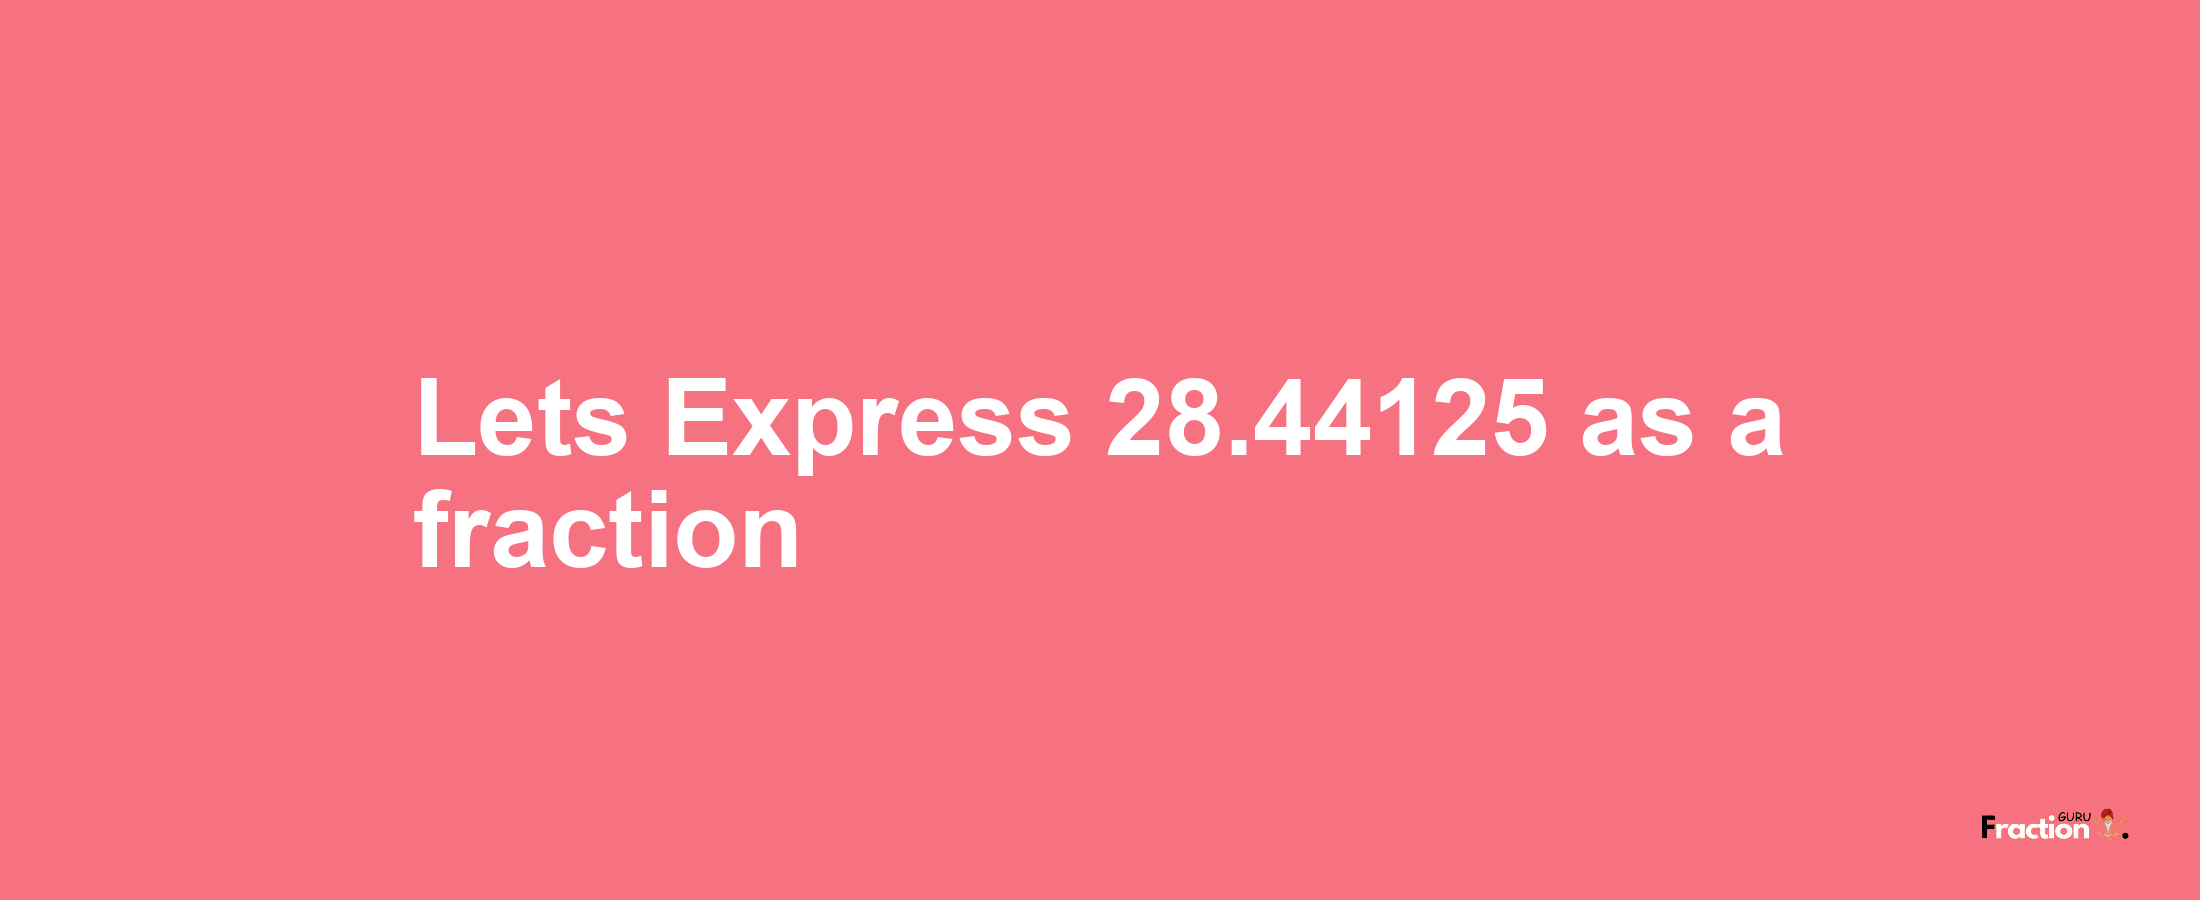 Lets Express 28.44125 as afraction